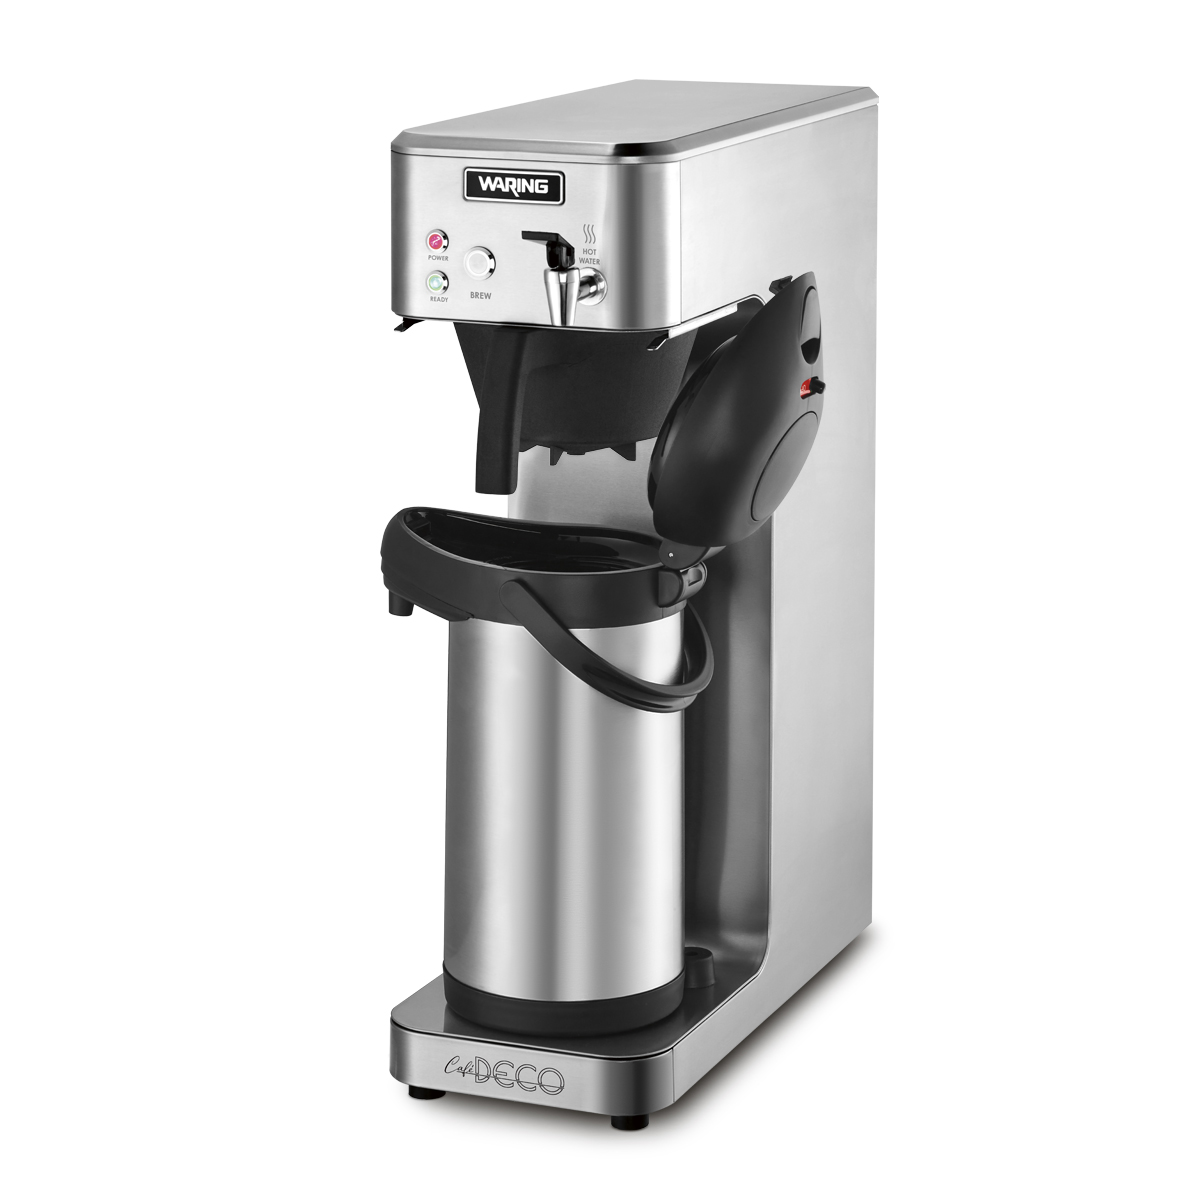 https://www.waringcommercialproducts.com/files/products/wcm70pap-waring-cafe-deco-airpot-coffee-brewer-inset-1-1200x1200.jpg